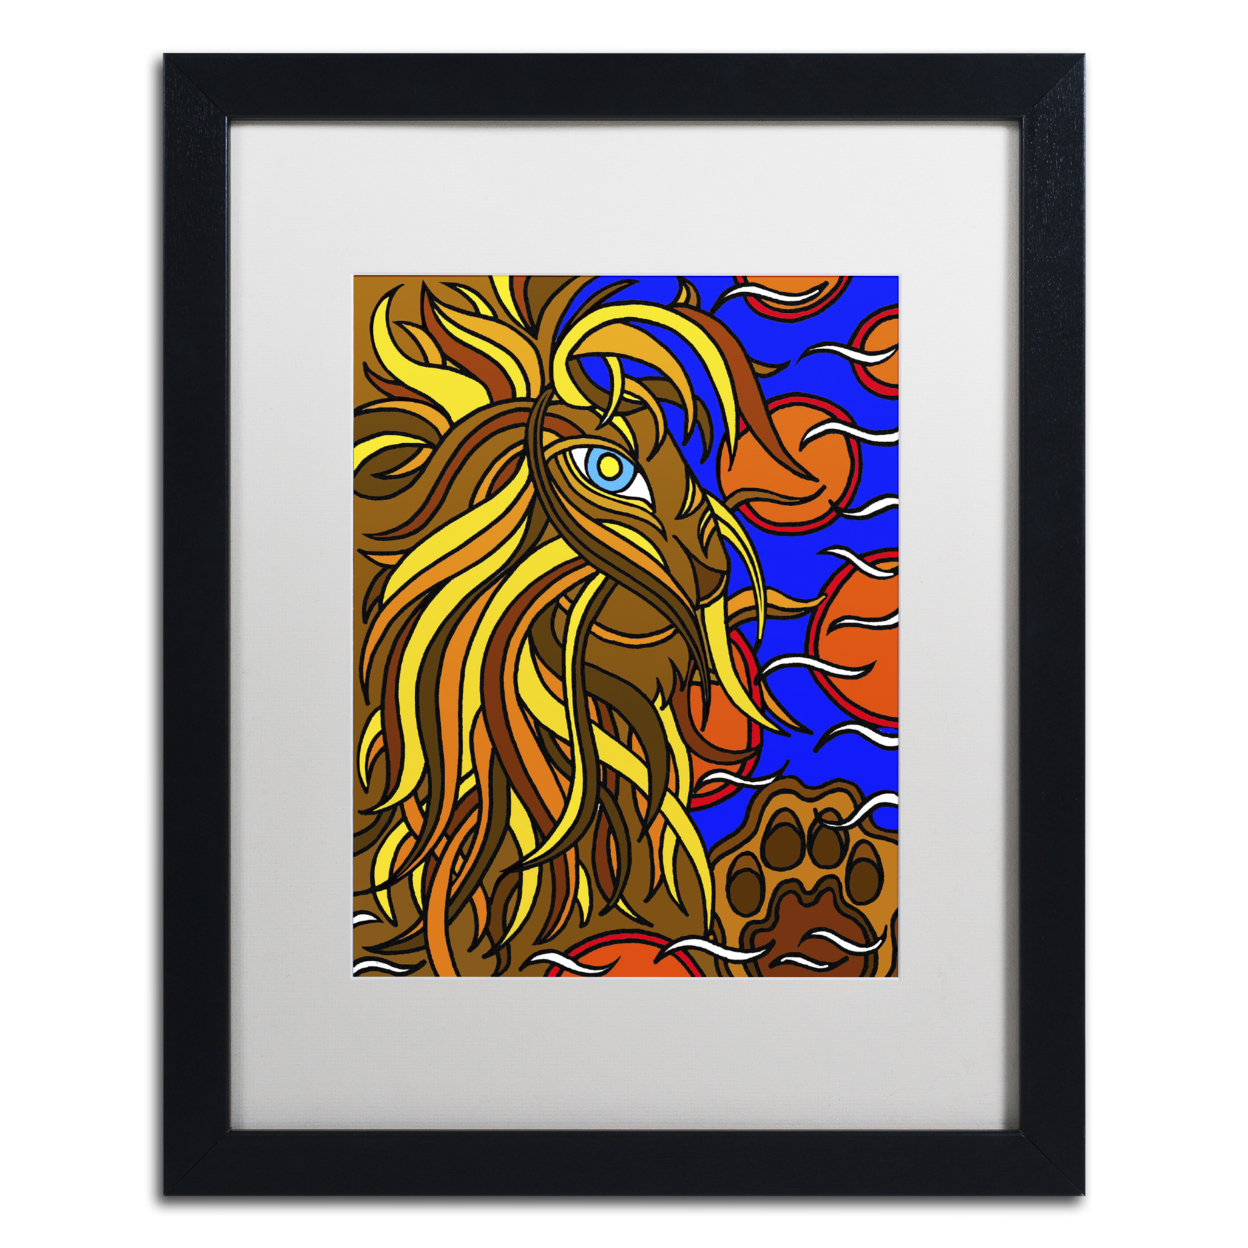 Kathy G. Ahrens 'Lester The Lion Alive' Black Wooden Framed Art 18 X 22 Inches